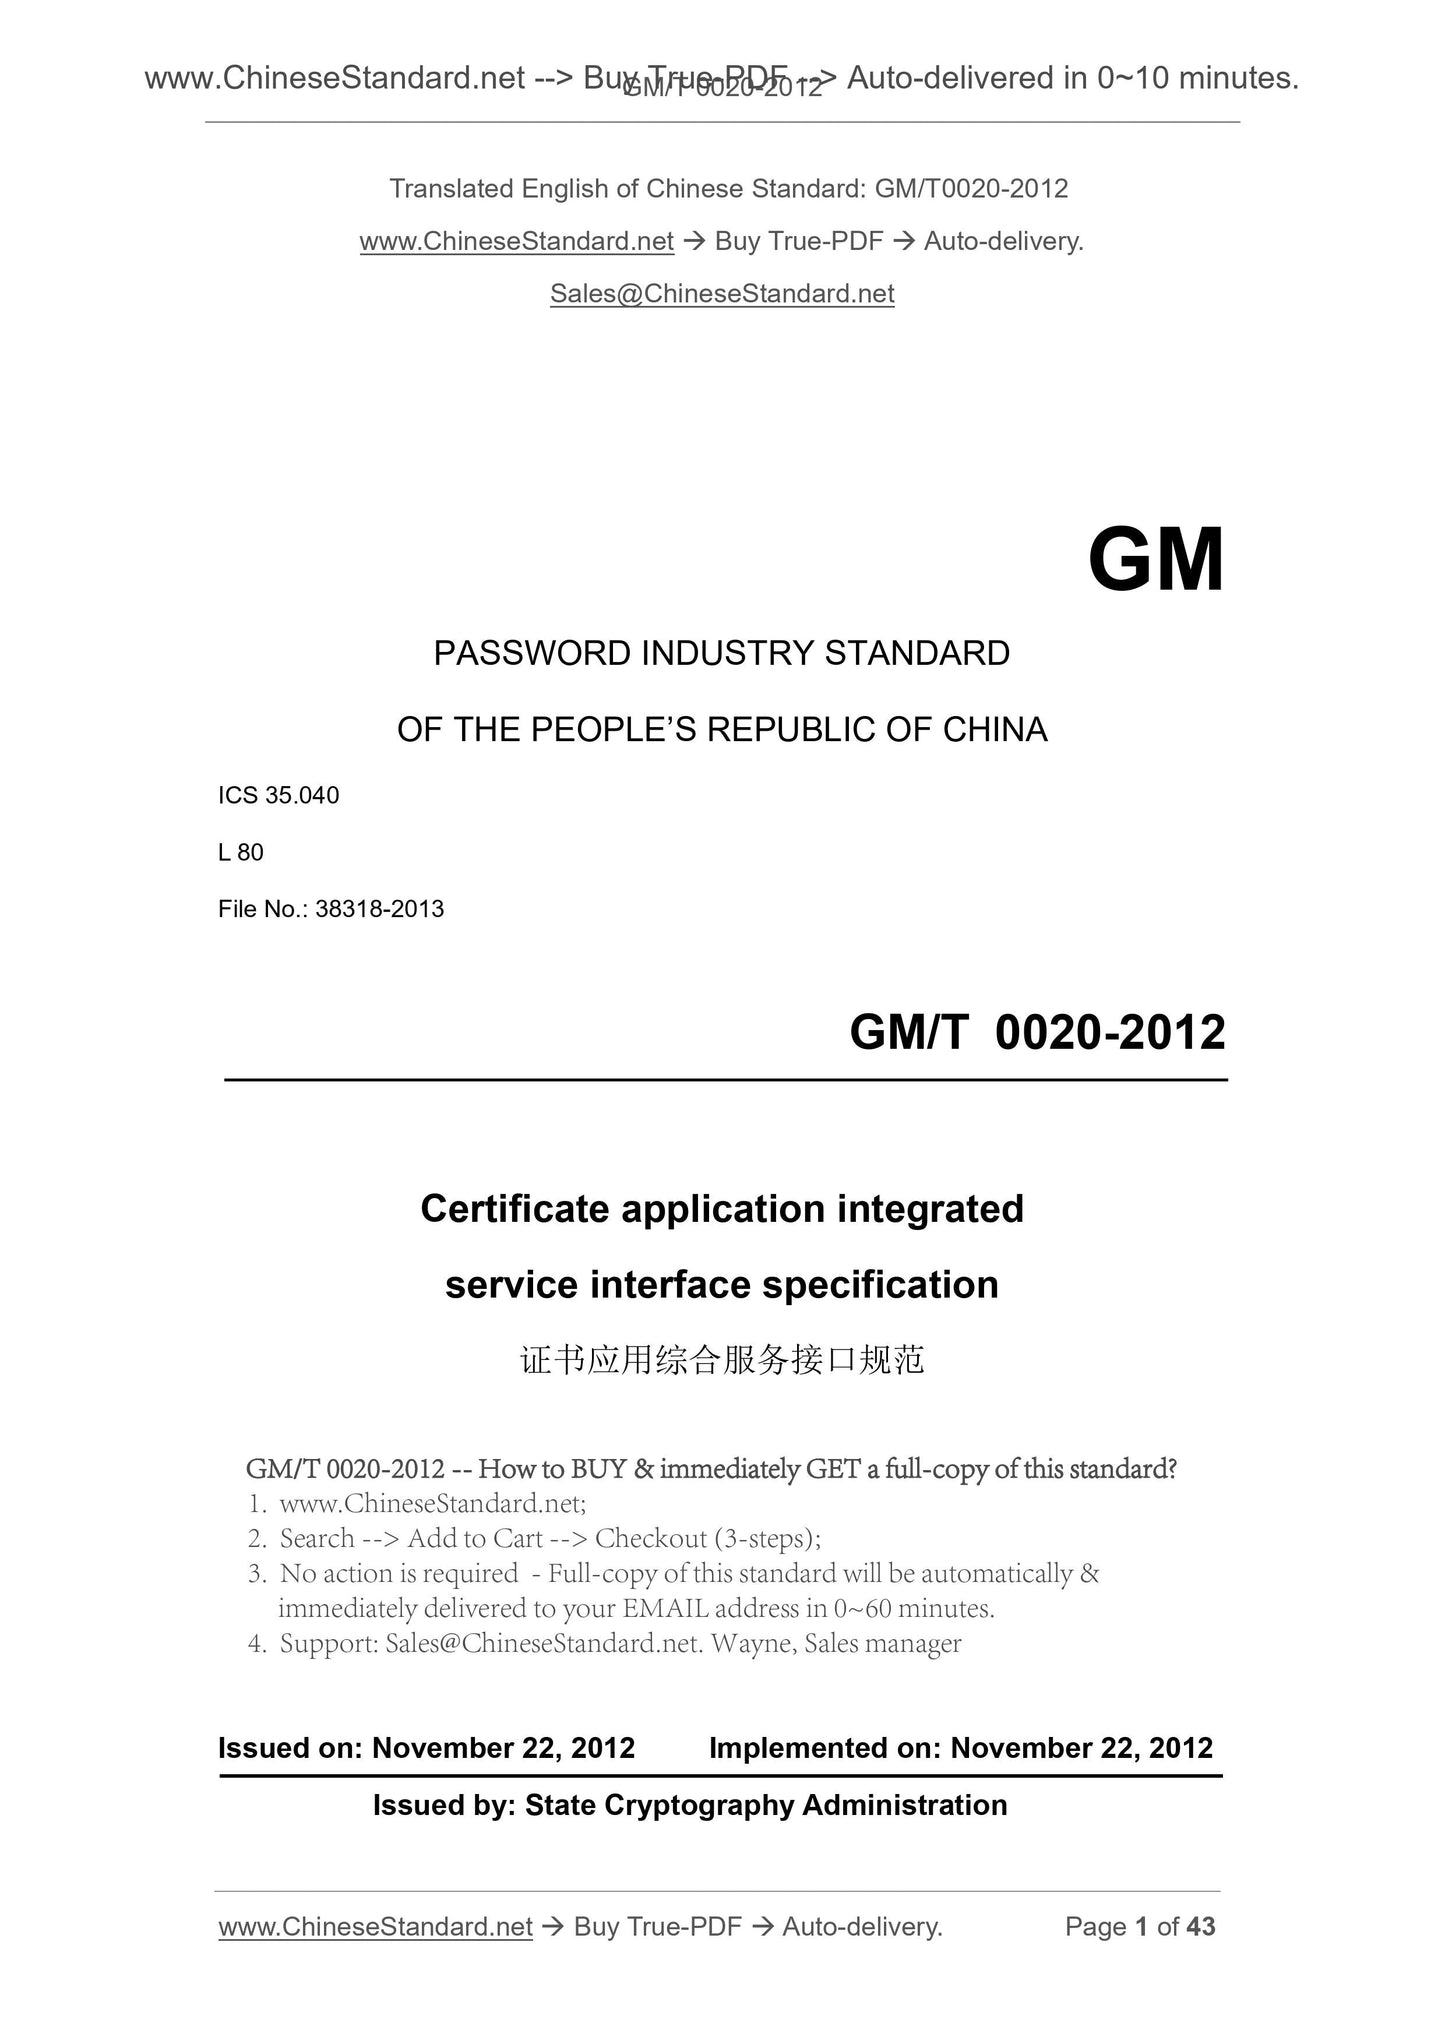 GM/T 0020-2012 Page 1